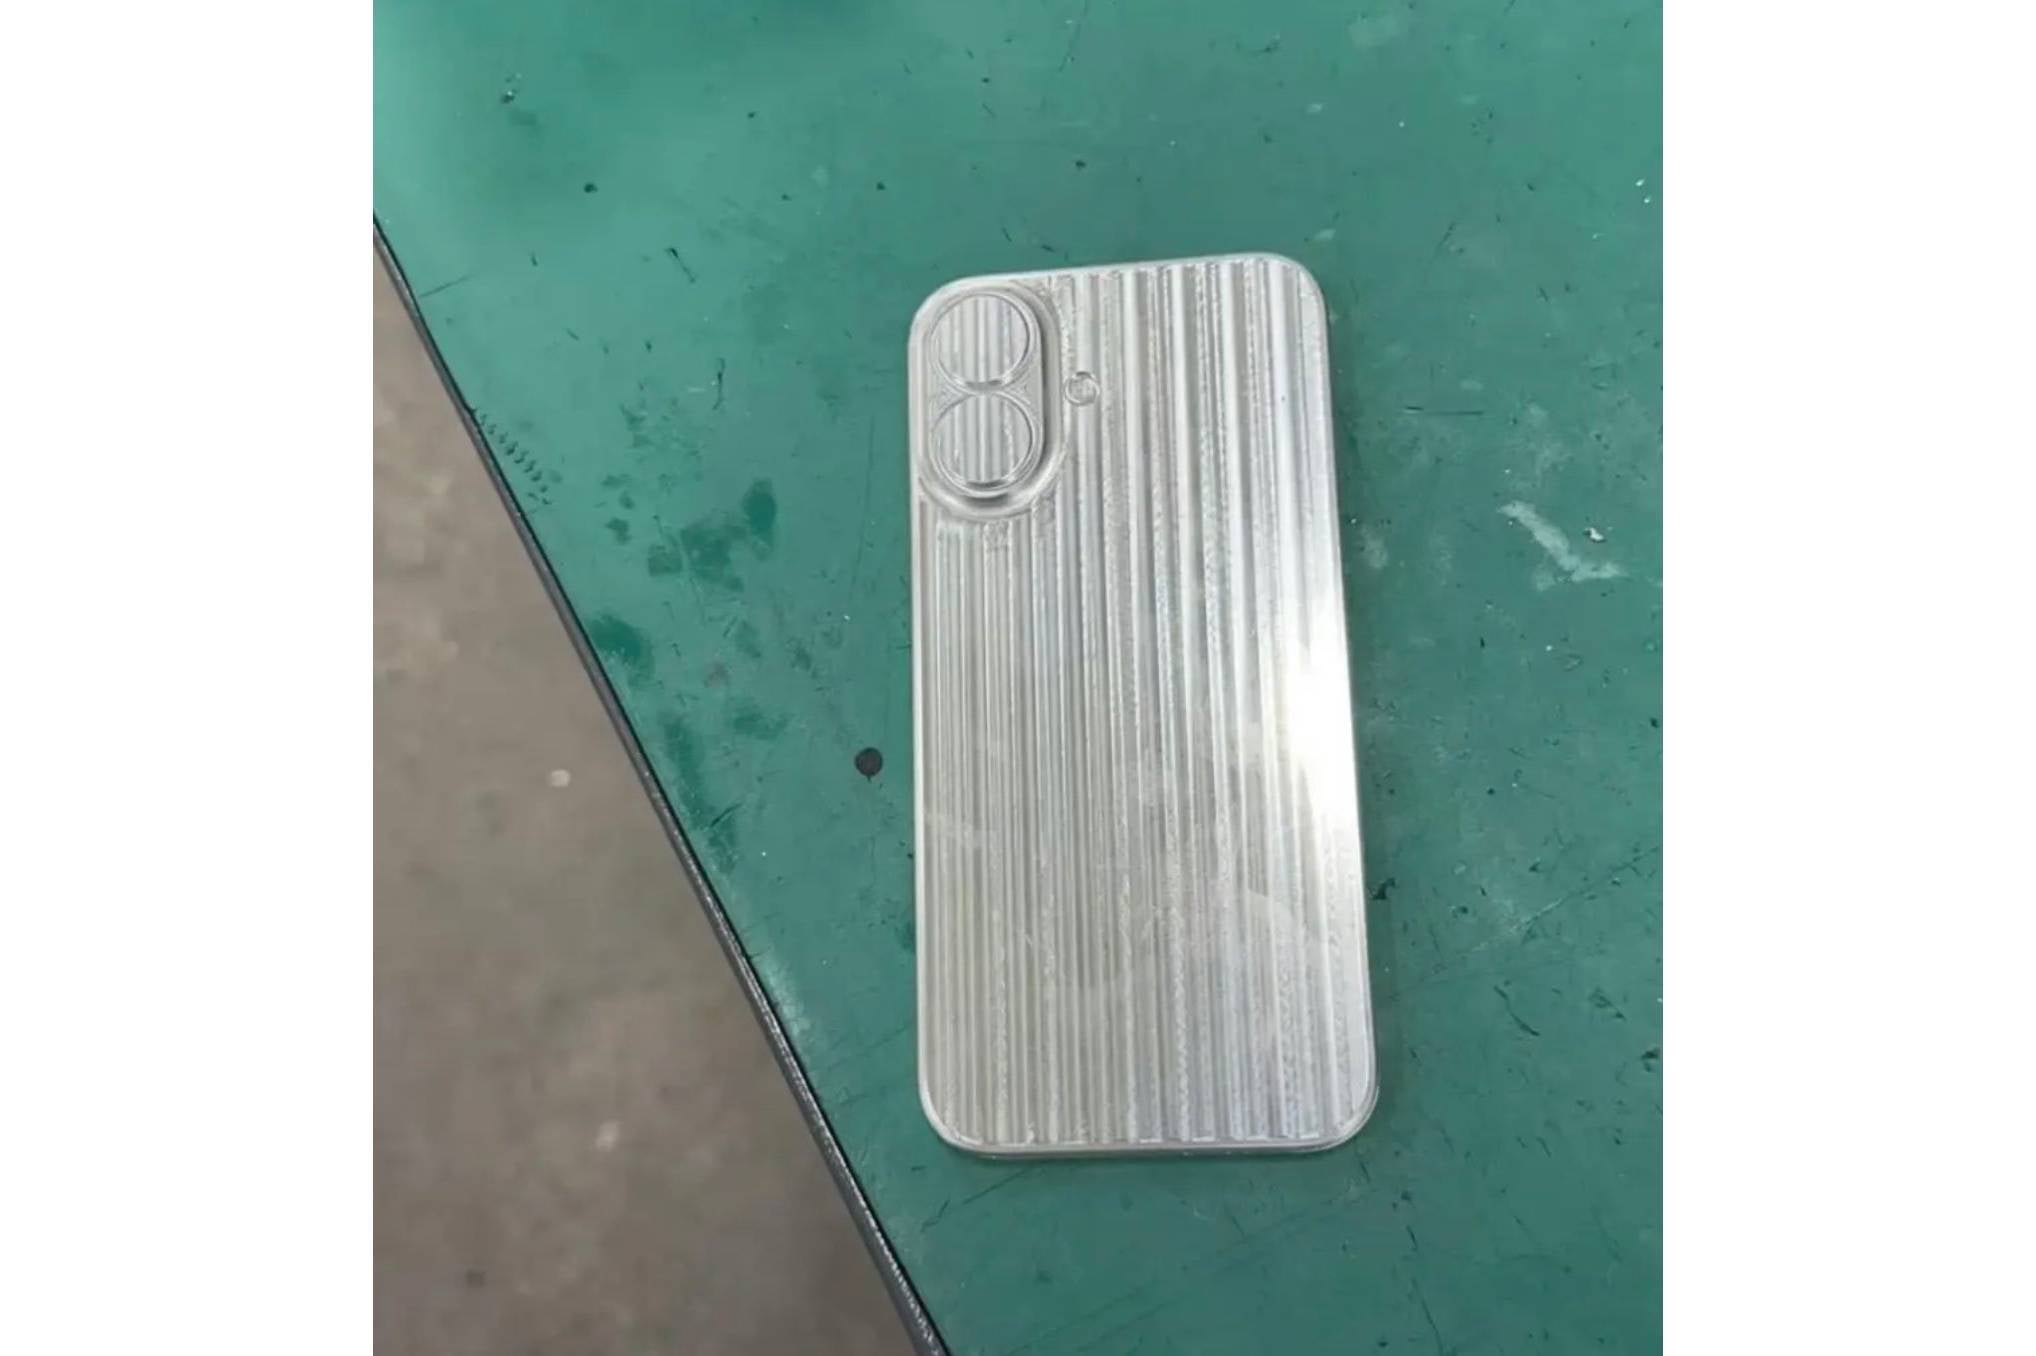 Leaked iPhone 16 mold - Leaked iPhone 16 mold showcases a design stuck in 2017